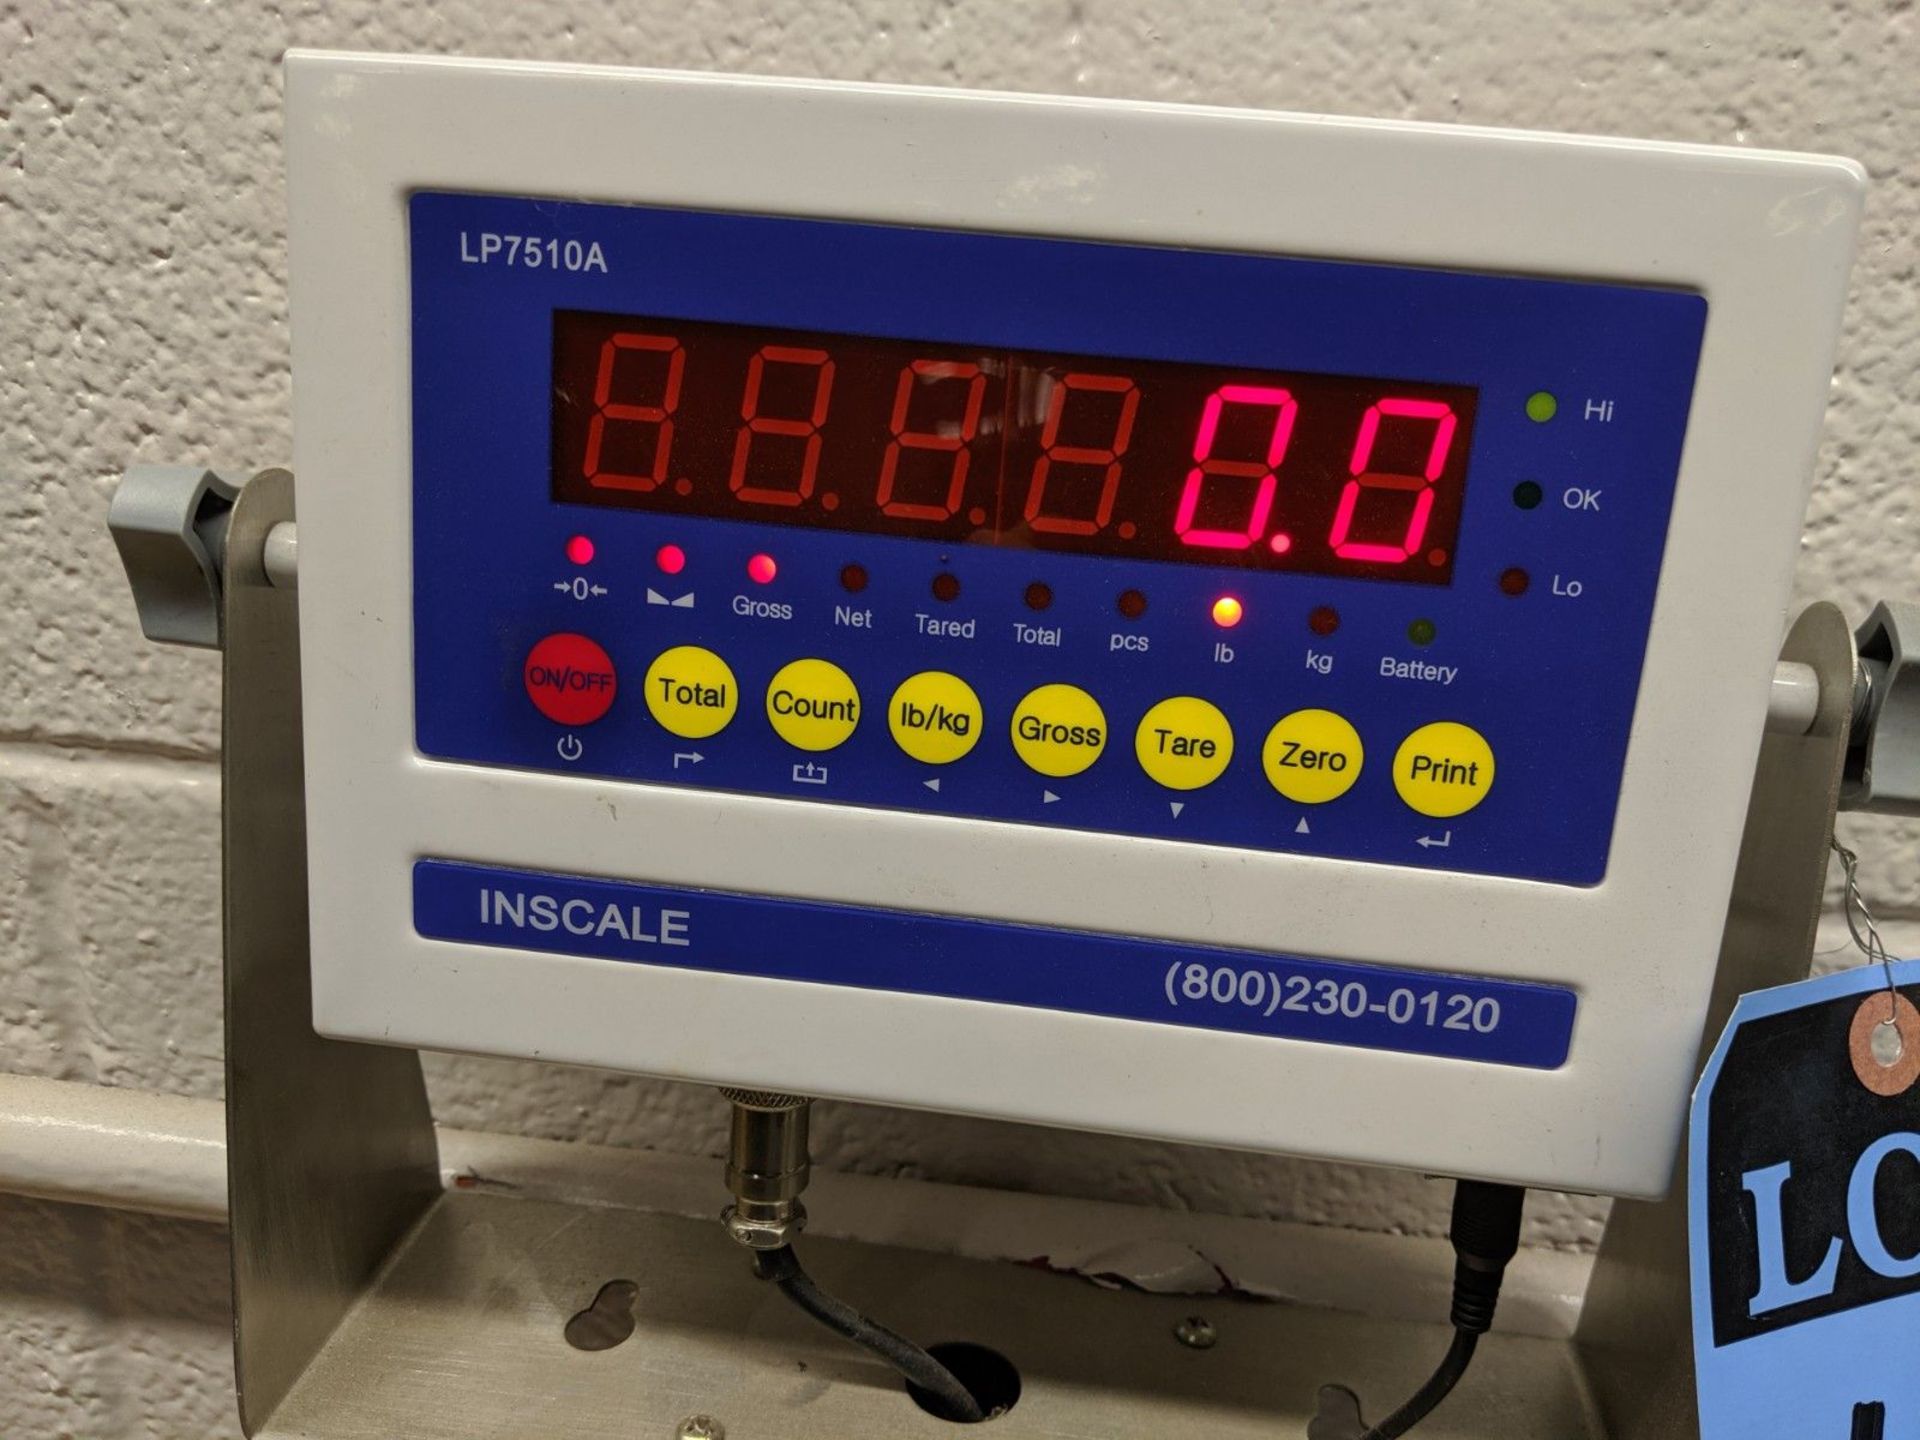 INSCALE DIGITAL SHIPPING SCALE MODEL LP7510A, 1000 LB CAPACITY, 0.2 LB INCREMENTS, 24" X 24" - Image 3 of 4